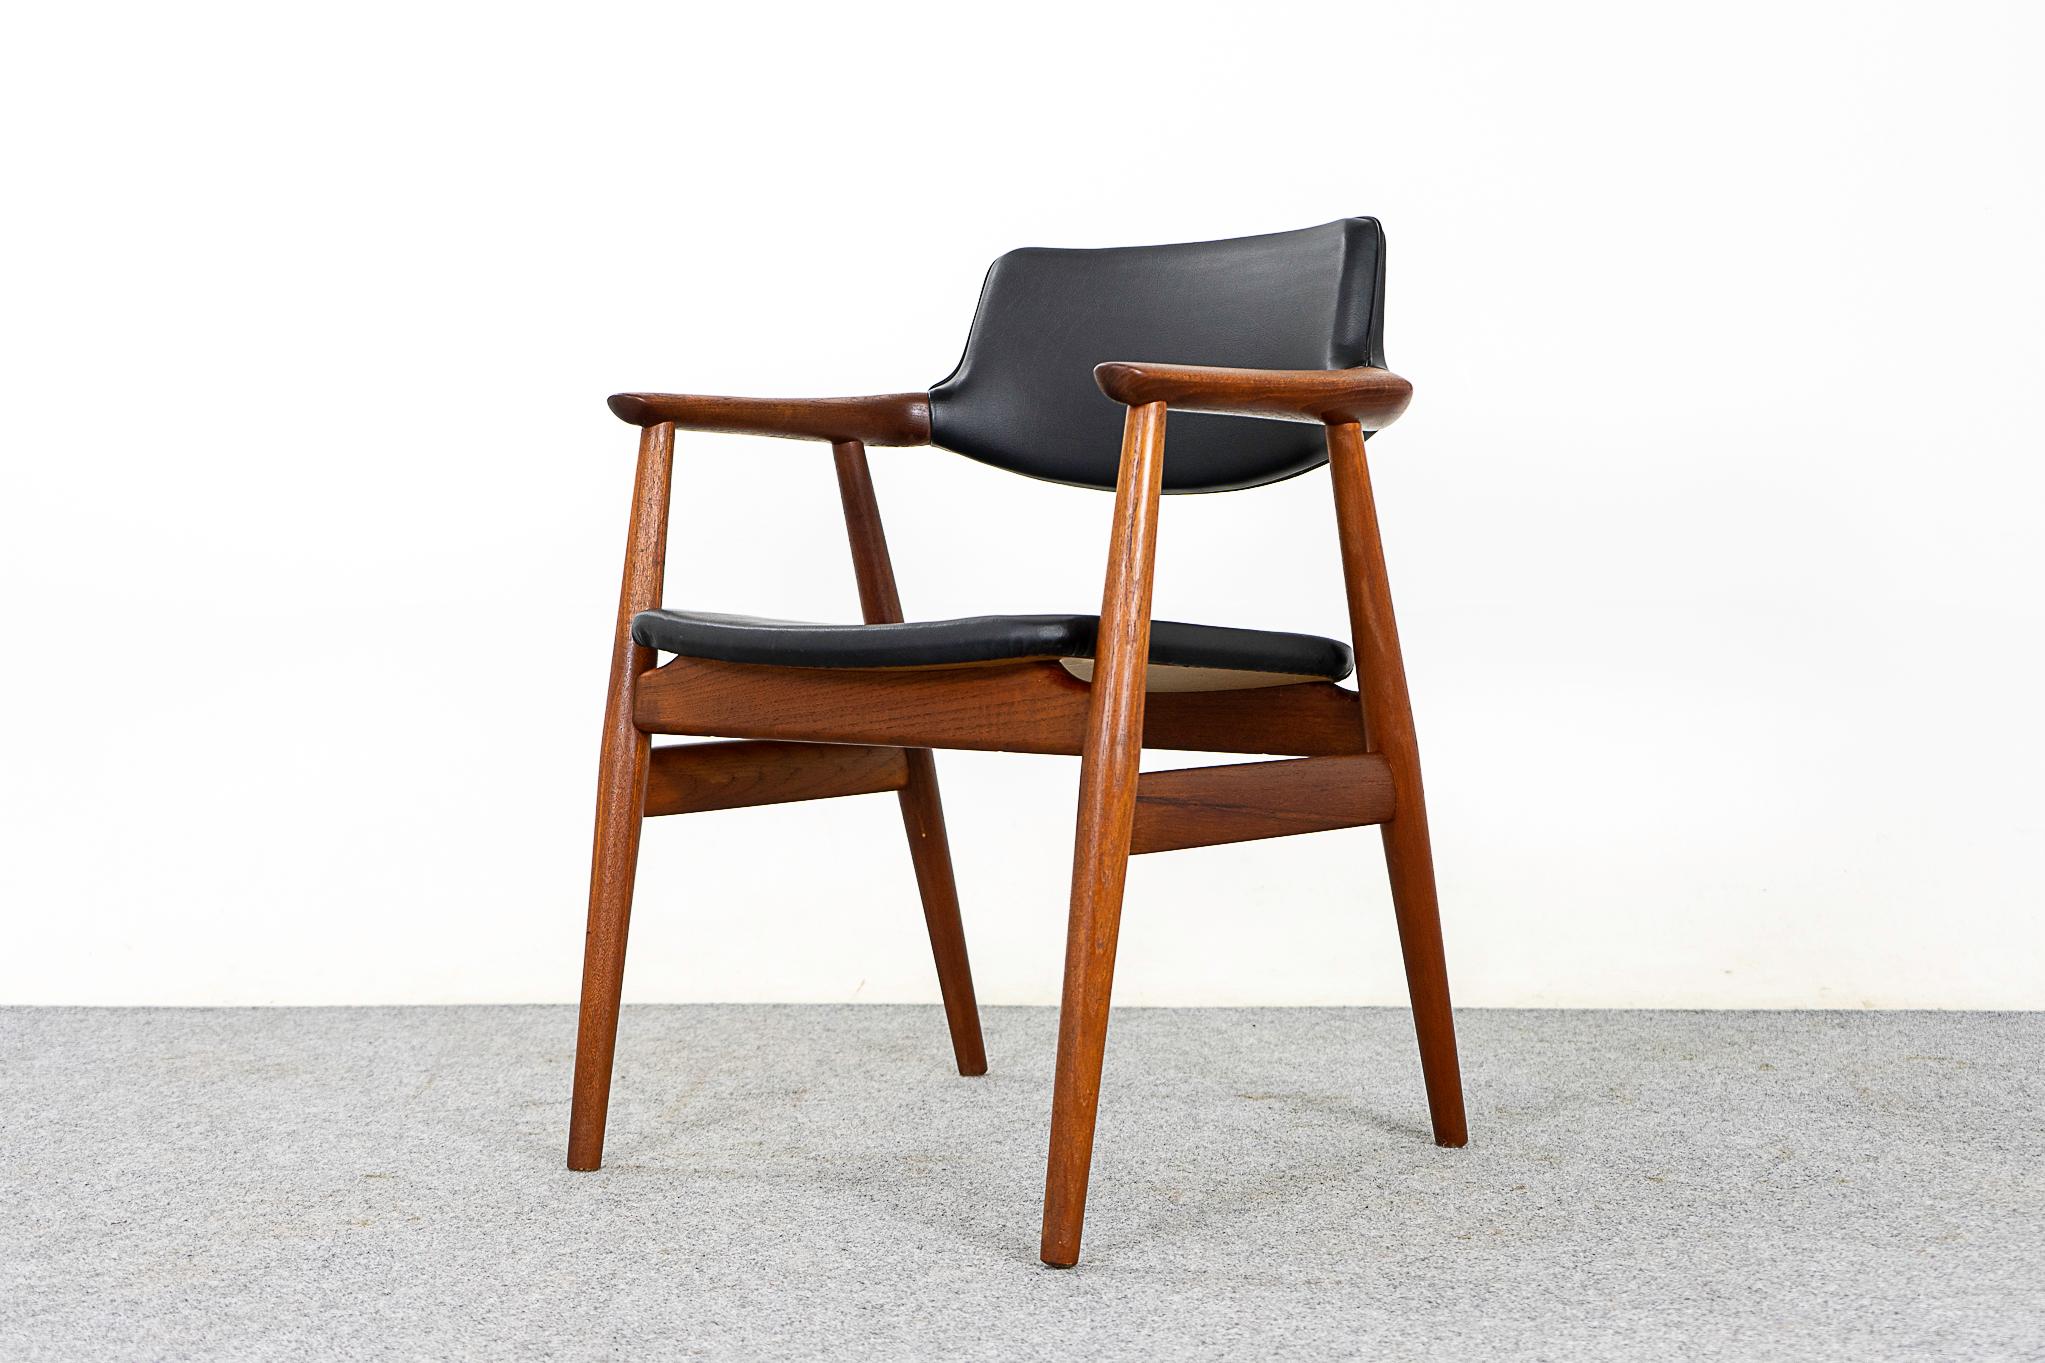 Teak and vinyl model GM11 armchair by Svend Aage Eriksen for Glostrup, circa 1960's. Beautifully sculpted elegant frame with swooping arms, perfectly scaled for any room!

Please inquire for remote and international shipping rates.